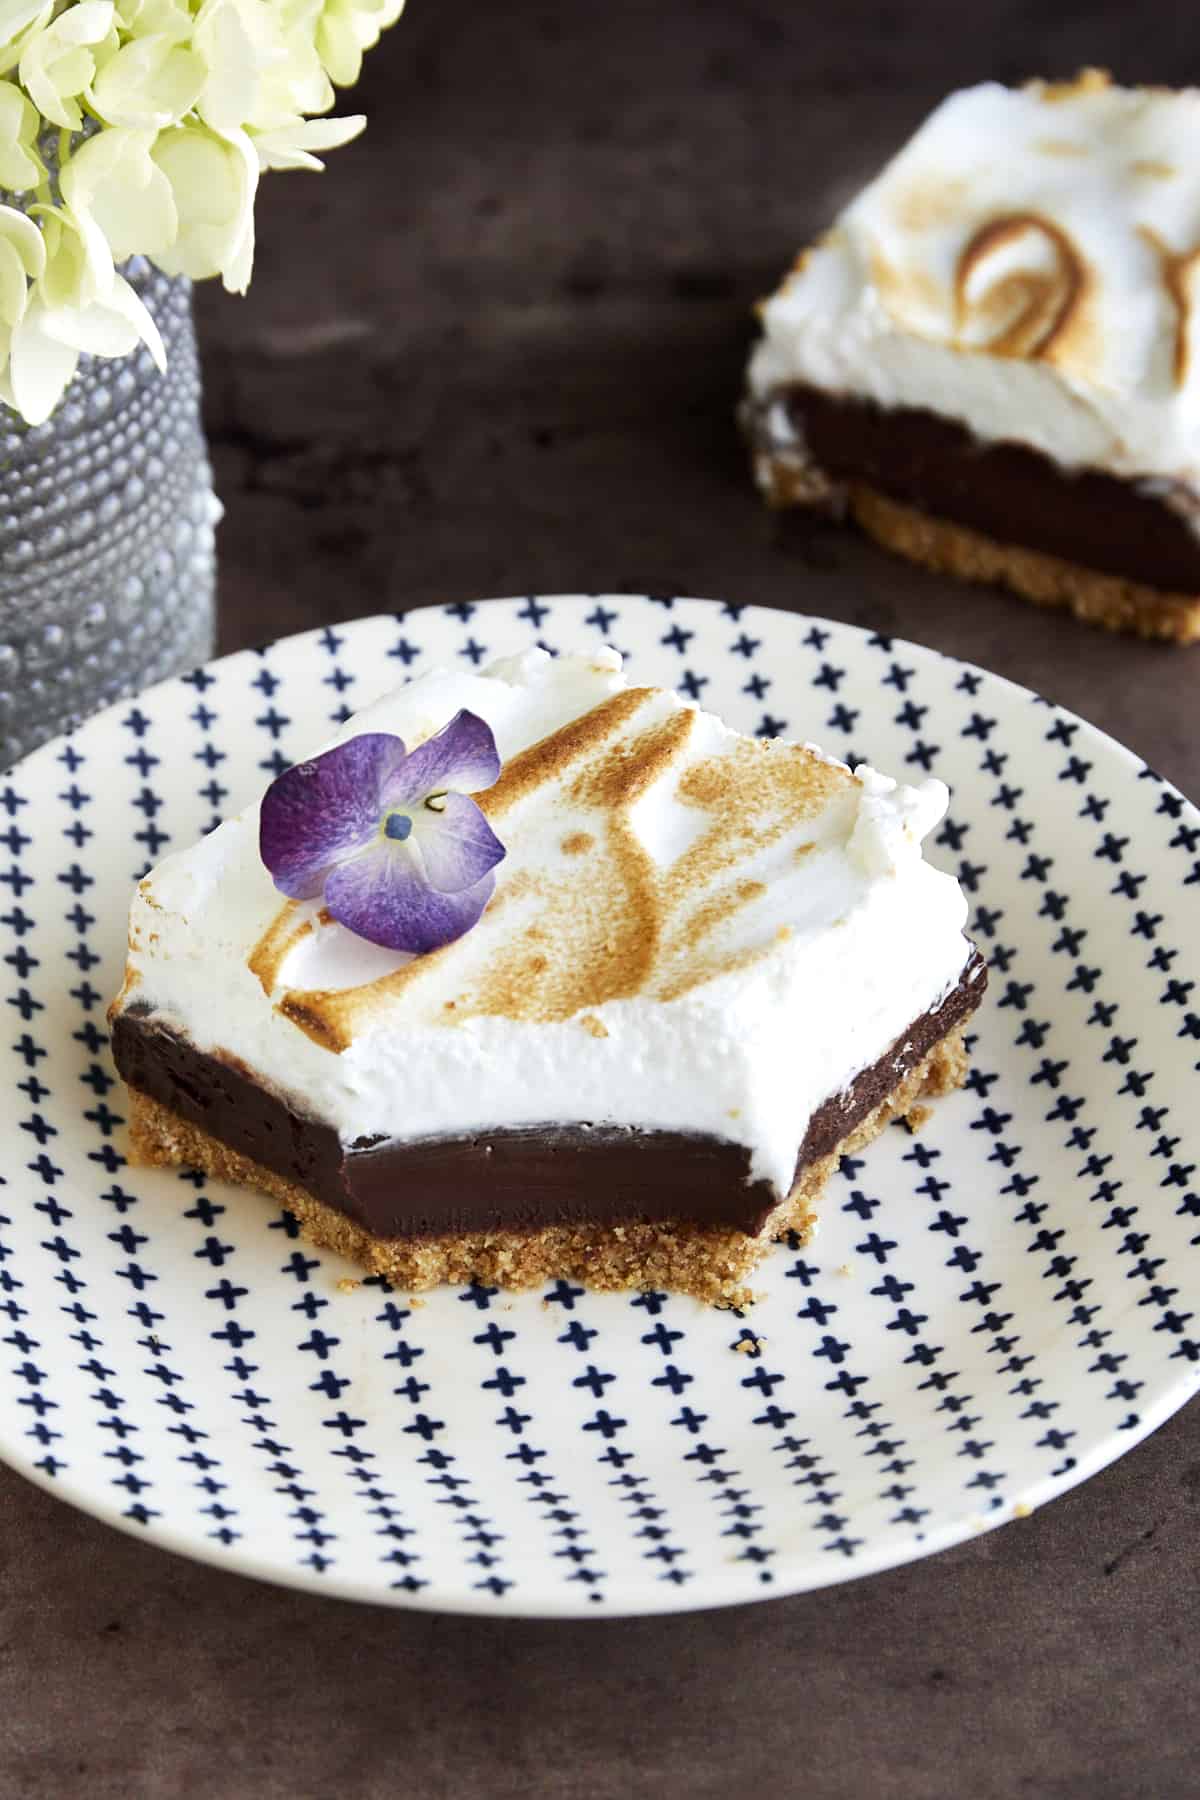 A sliced s'mores bar with a graham cracker layer, a chocolate ganache layer, and a meringue layer on top with a bite missing. 